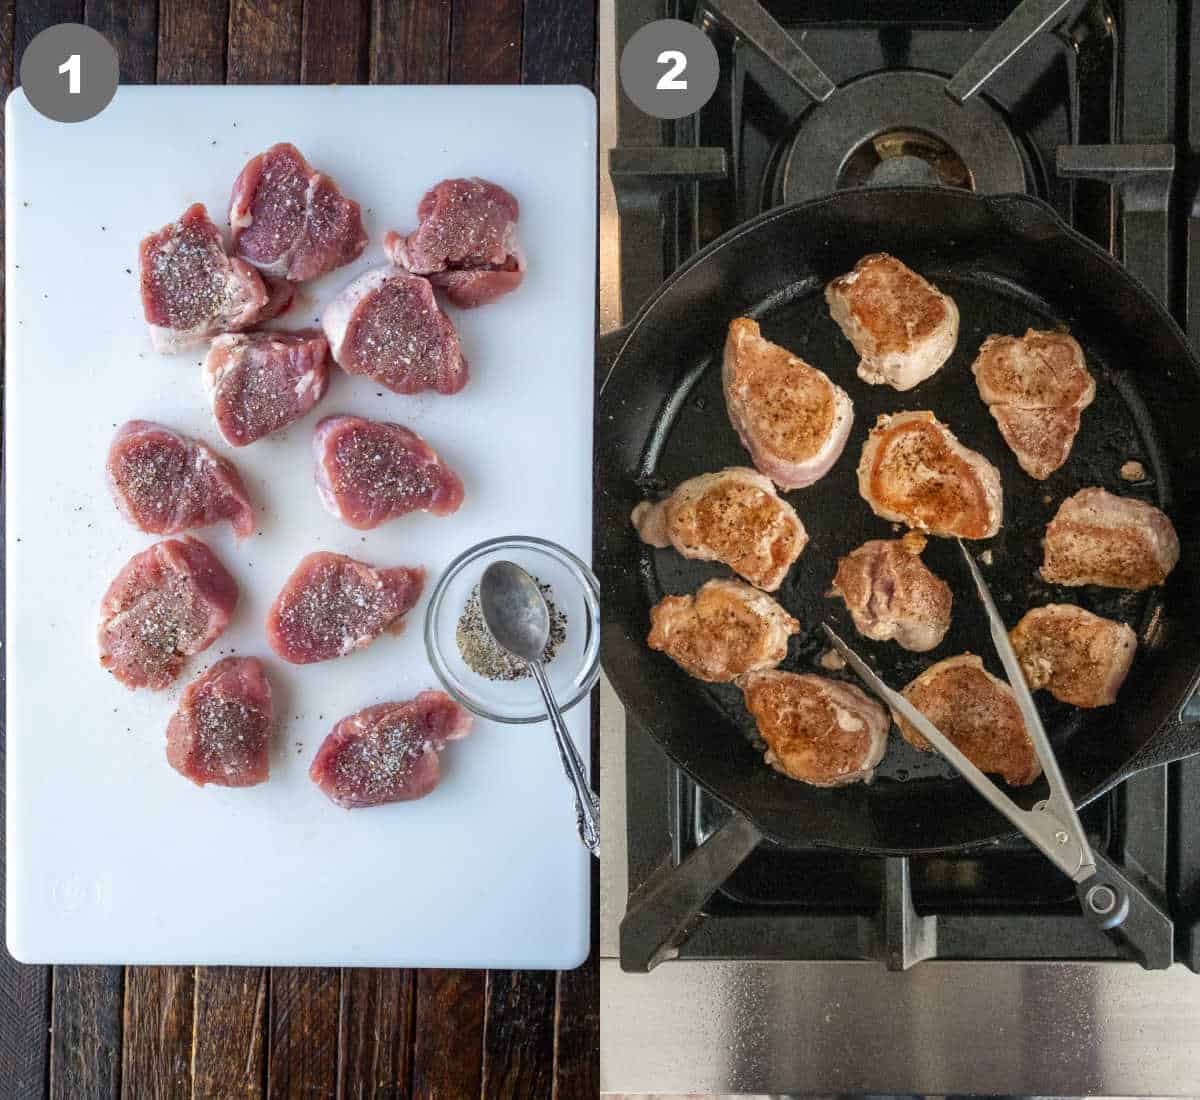 Steps 1 and 2 for cooking pork medallions.